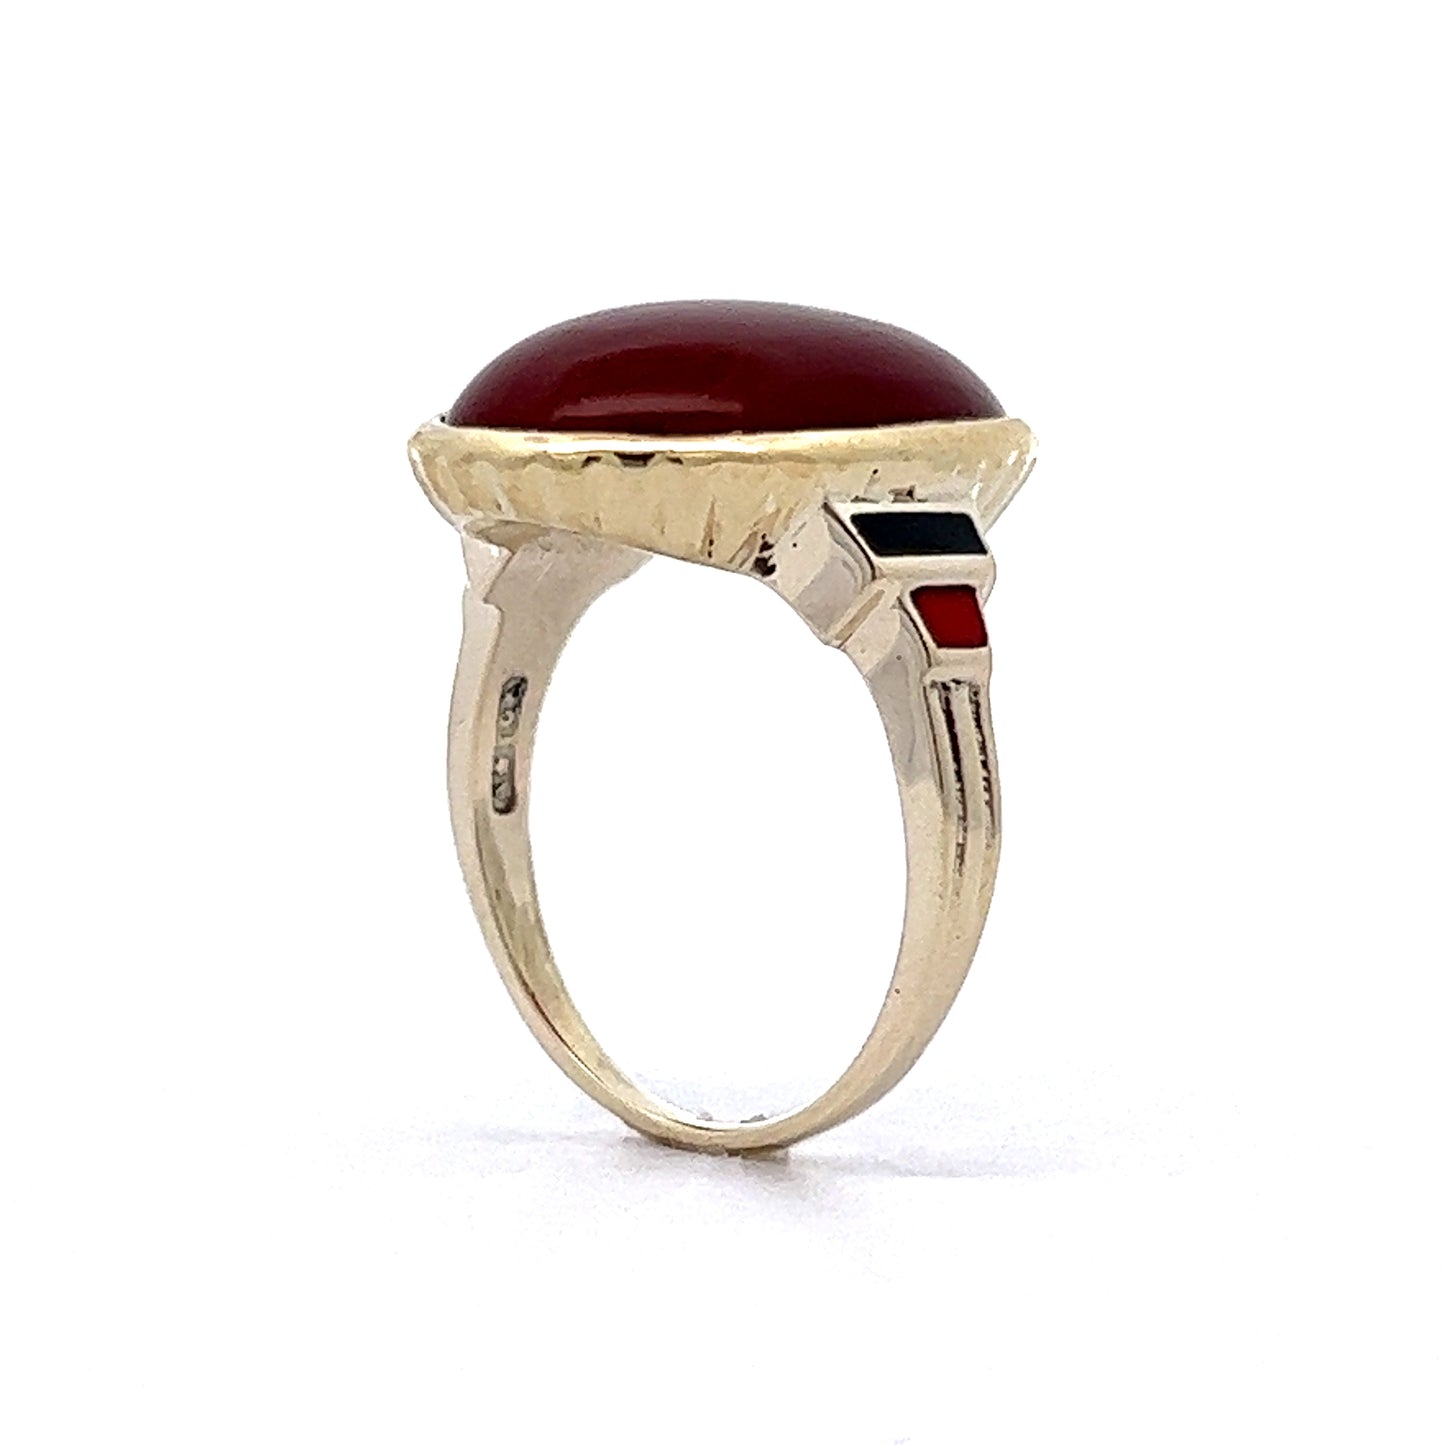 7.04 Mid-Century Red Carnelian Cocktail Ring in 10K Yellow Gold